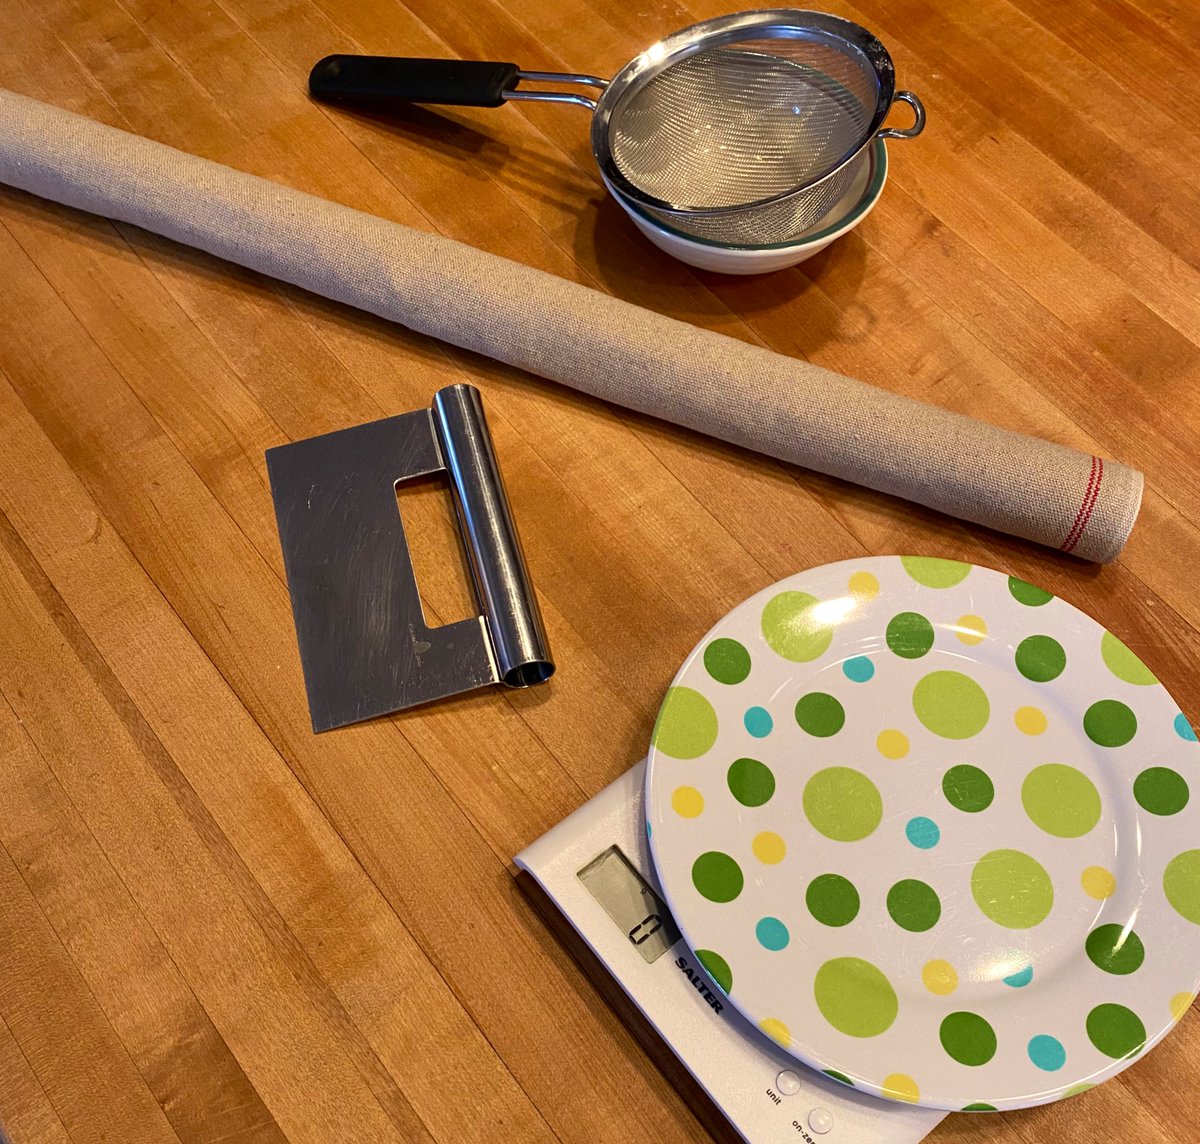 IT IS JUST ABOUT TIME to get started baking. This will take about three-and-a-half hours. Clear out a workspace. The coq avec chapeau Mardi Gras lamp is optional but preferred. You’ll also need the tools pictured: scale, pastry knife, sieve and bowl, and baguette couche.